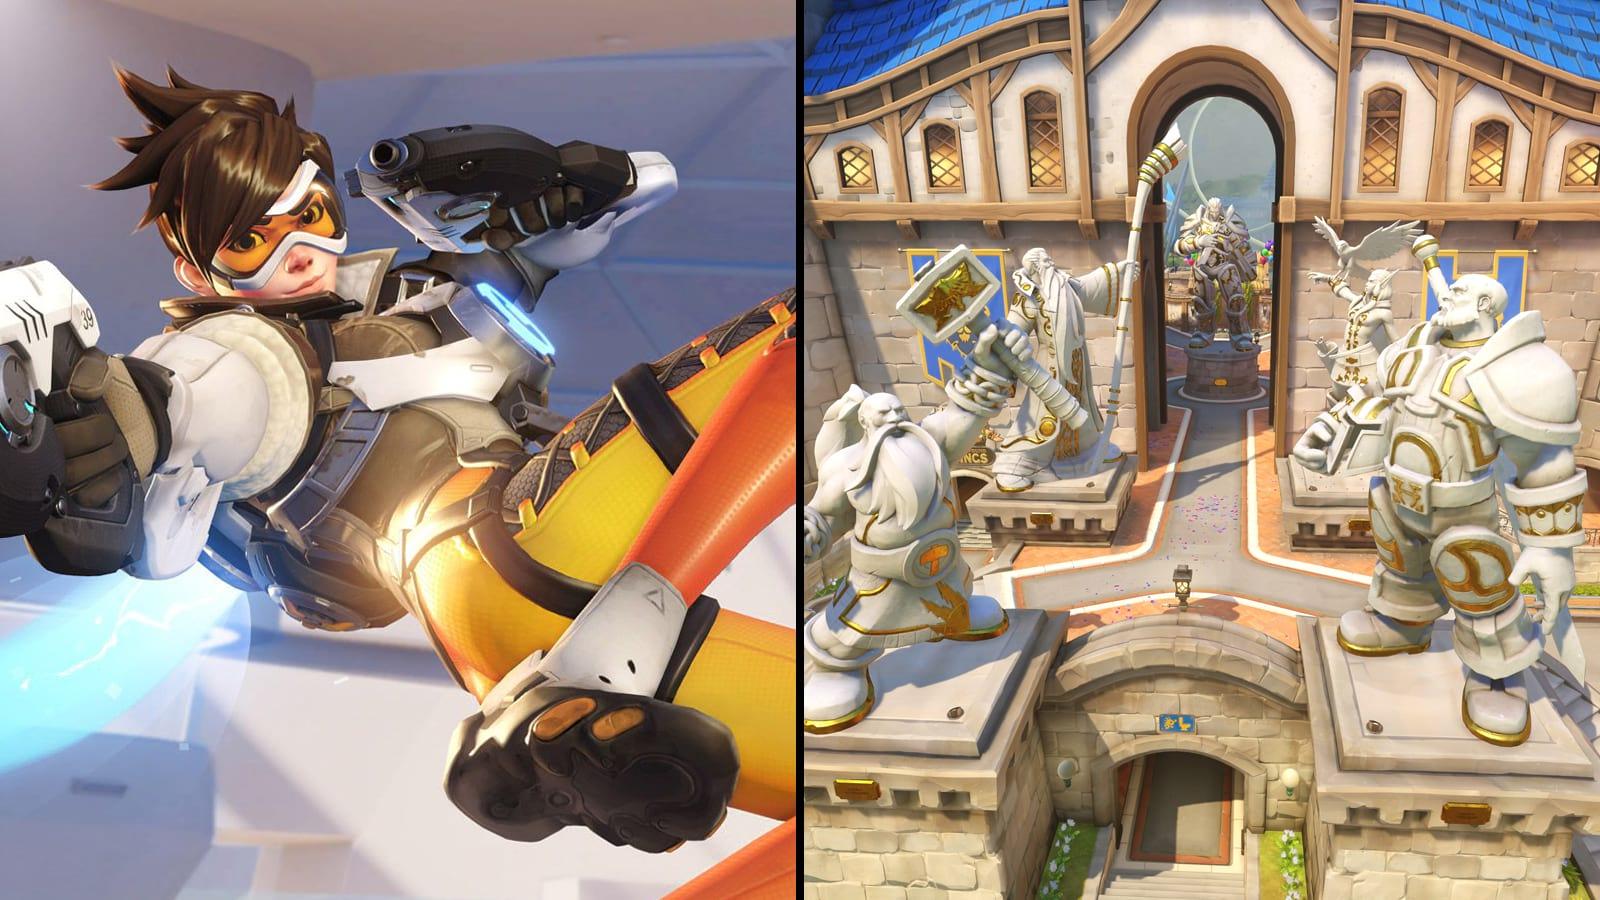 Overwatch 2 – Tracer Bug to be Addressed in Future Patch